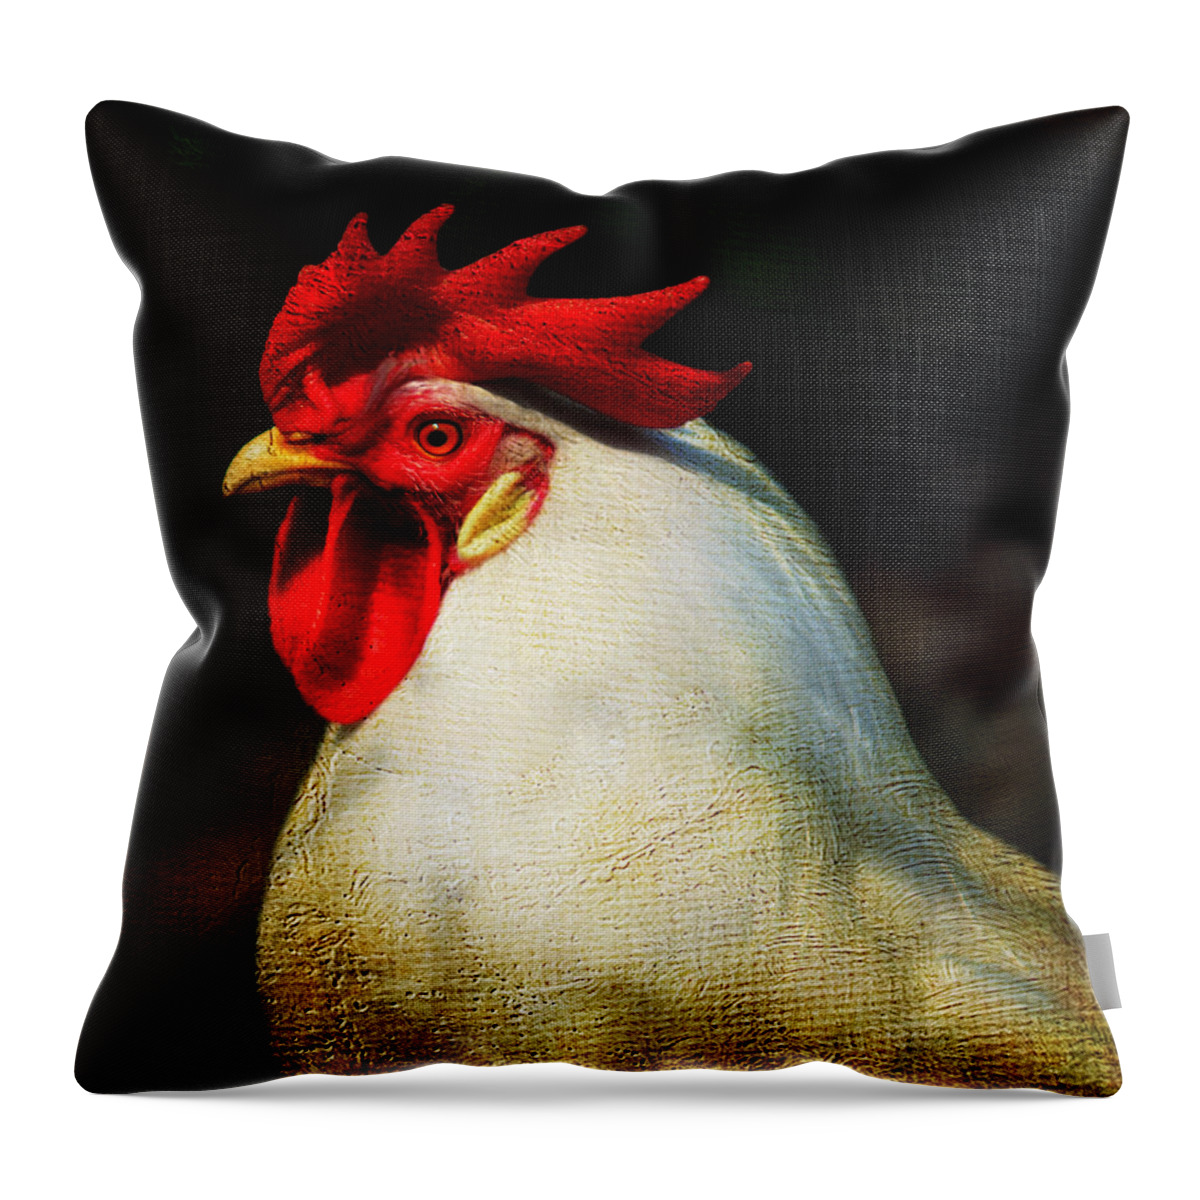 Cock Throw Pillow featuring the photograph Pride by Jenny Rainbow